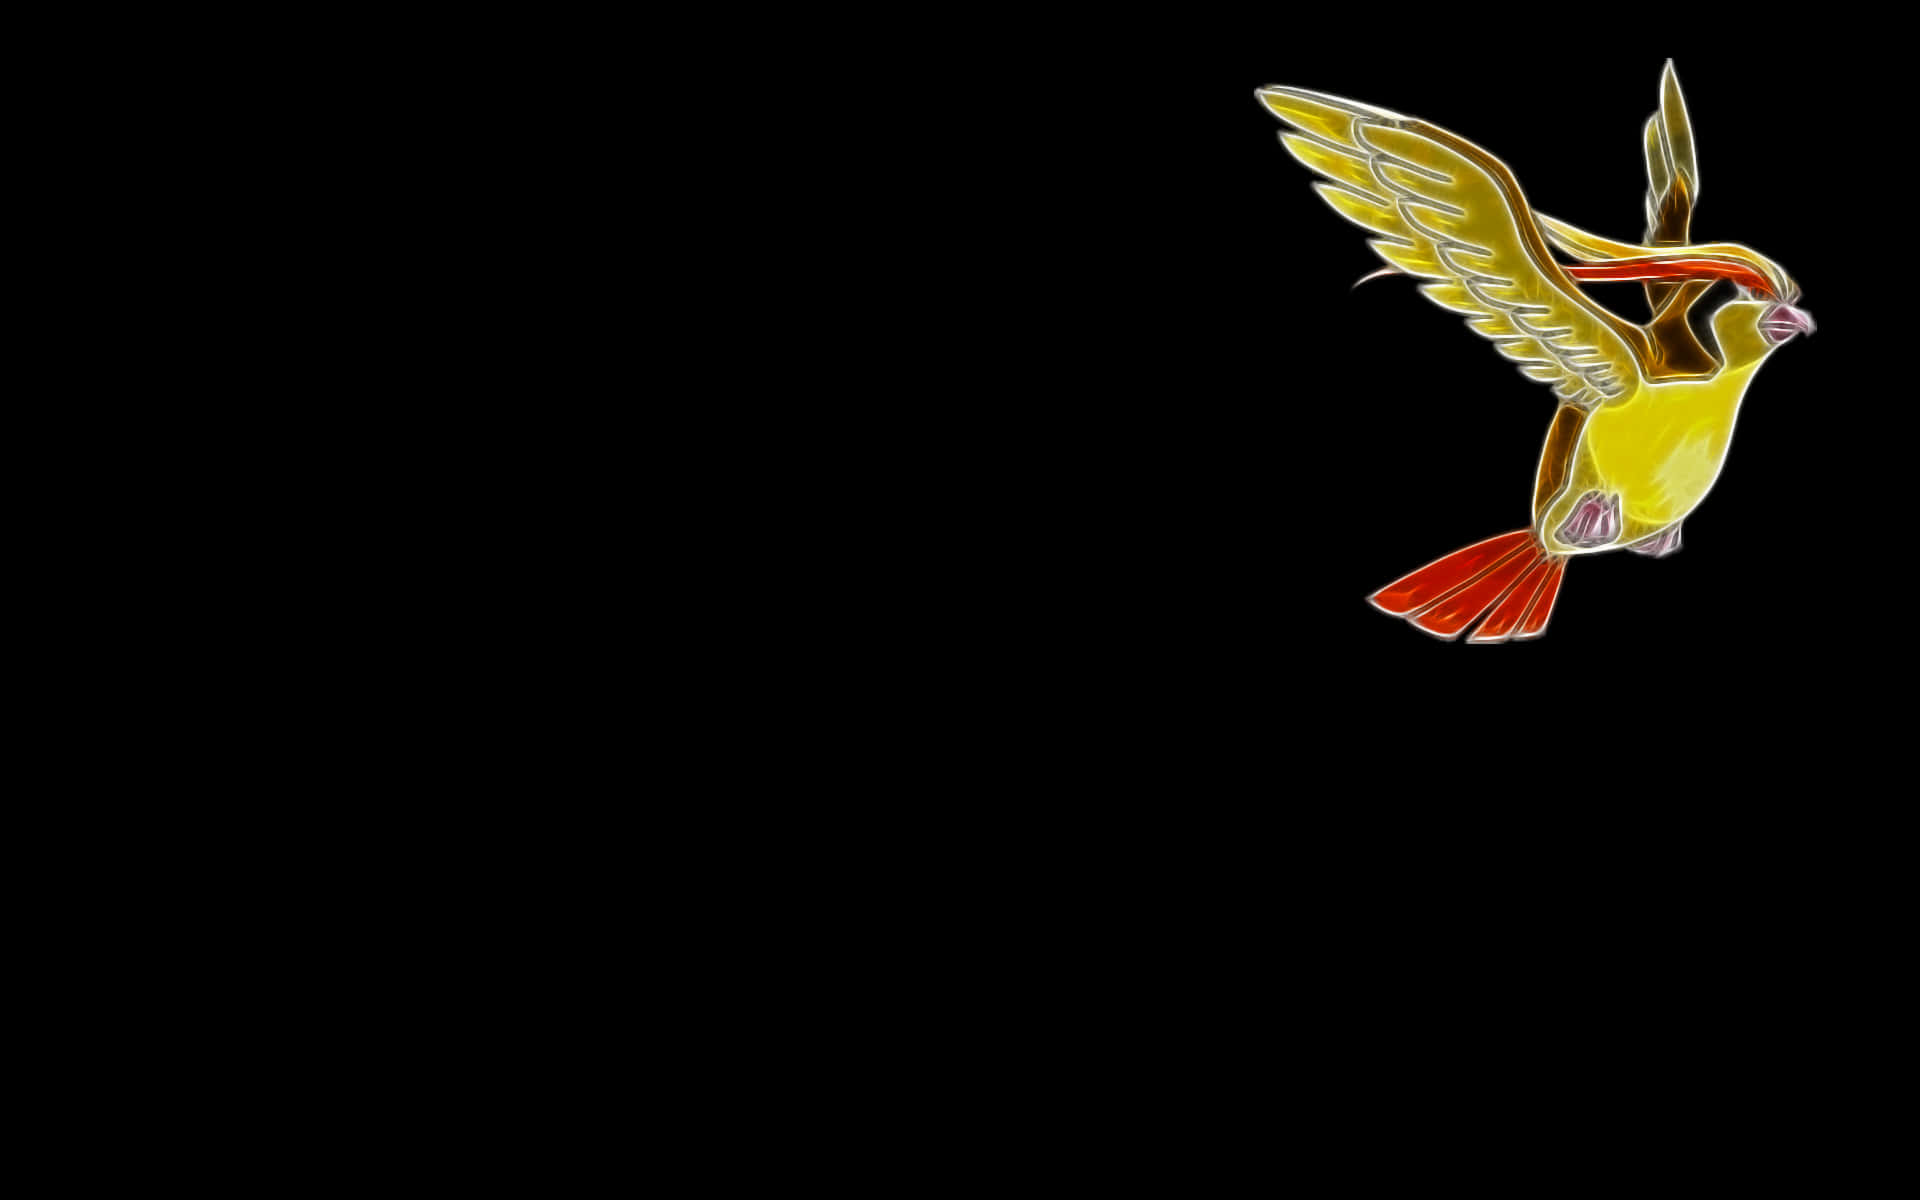 Glowing Pidgeotto Flying Wallpaper